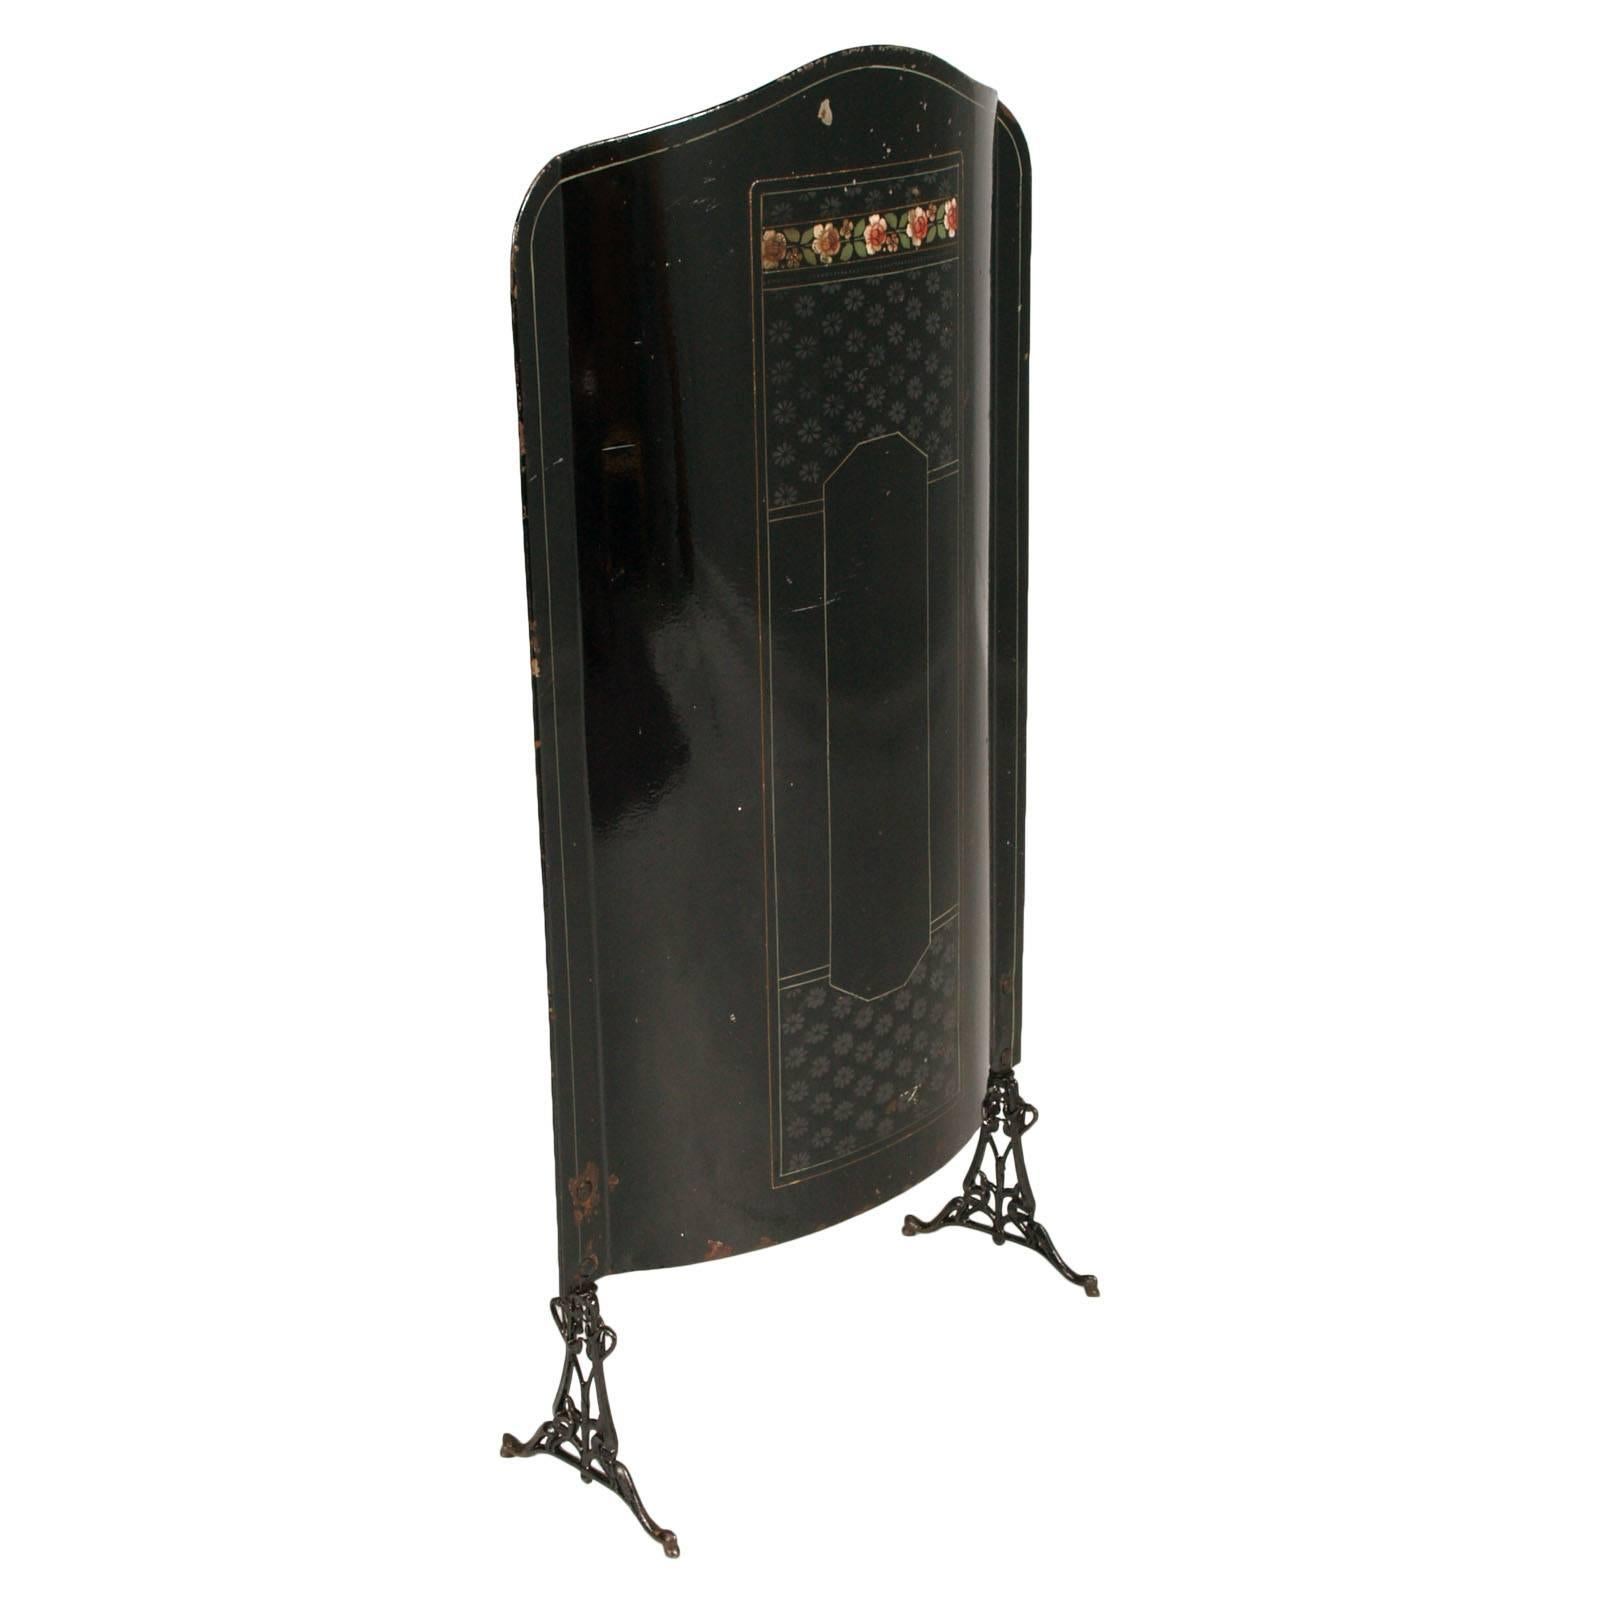 Art Nouveau fire screen in black enamelled steel with mother-of-pearl decoration. Enamelled cast iron legs.

Measures cm: H 121, W 62, D 23.